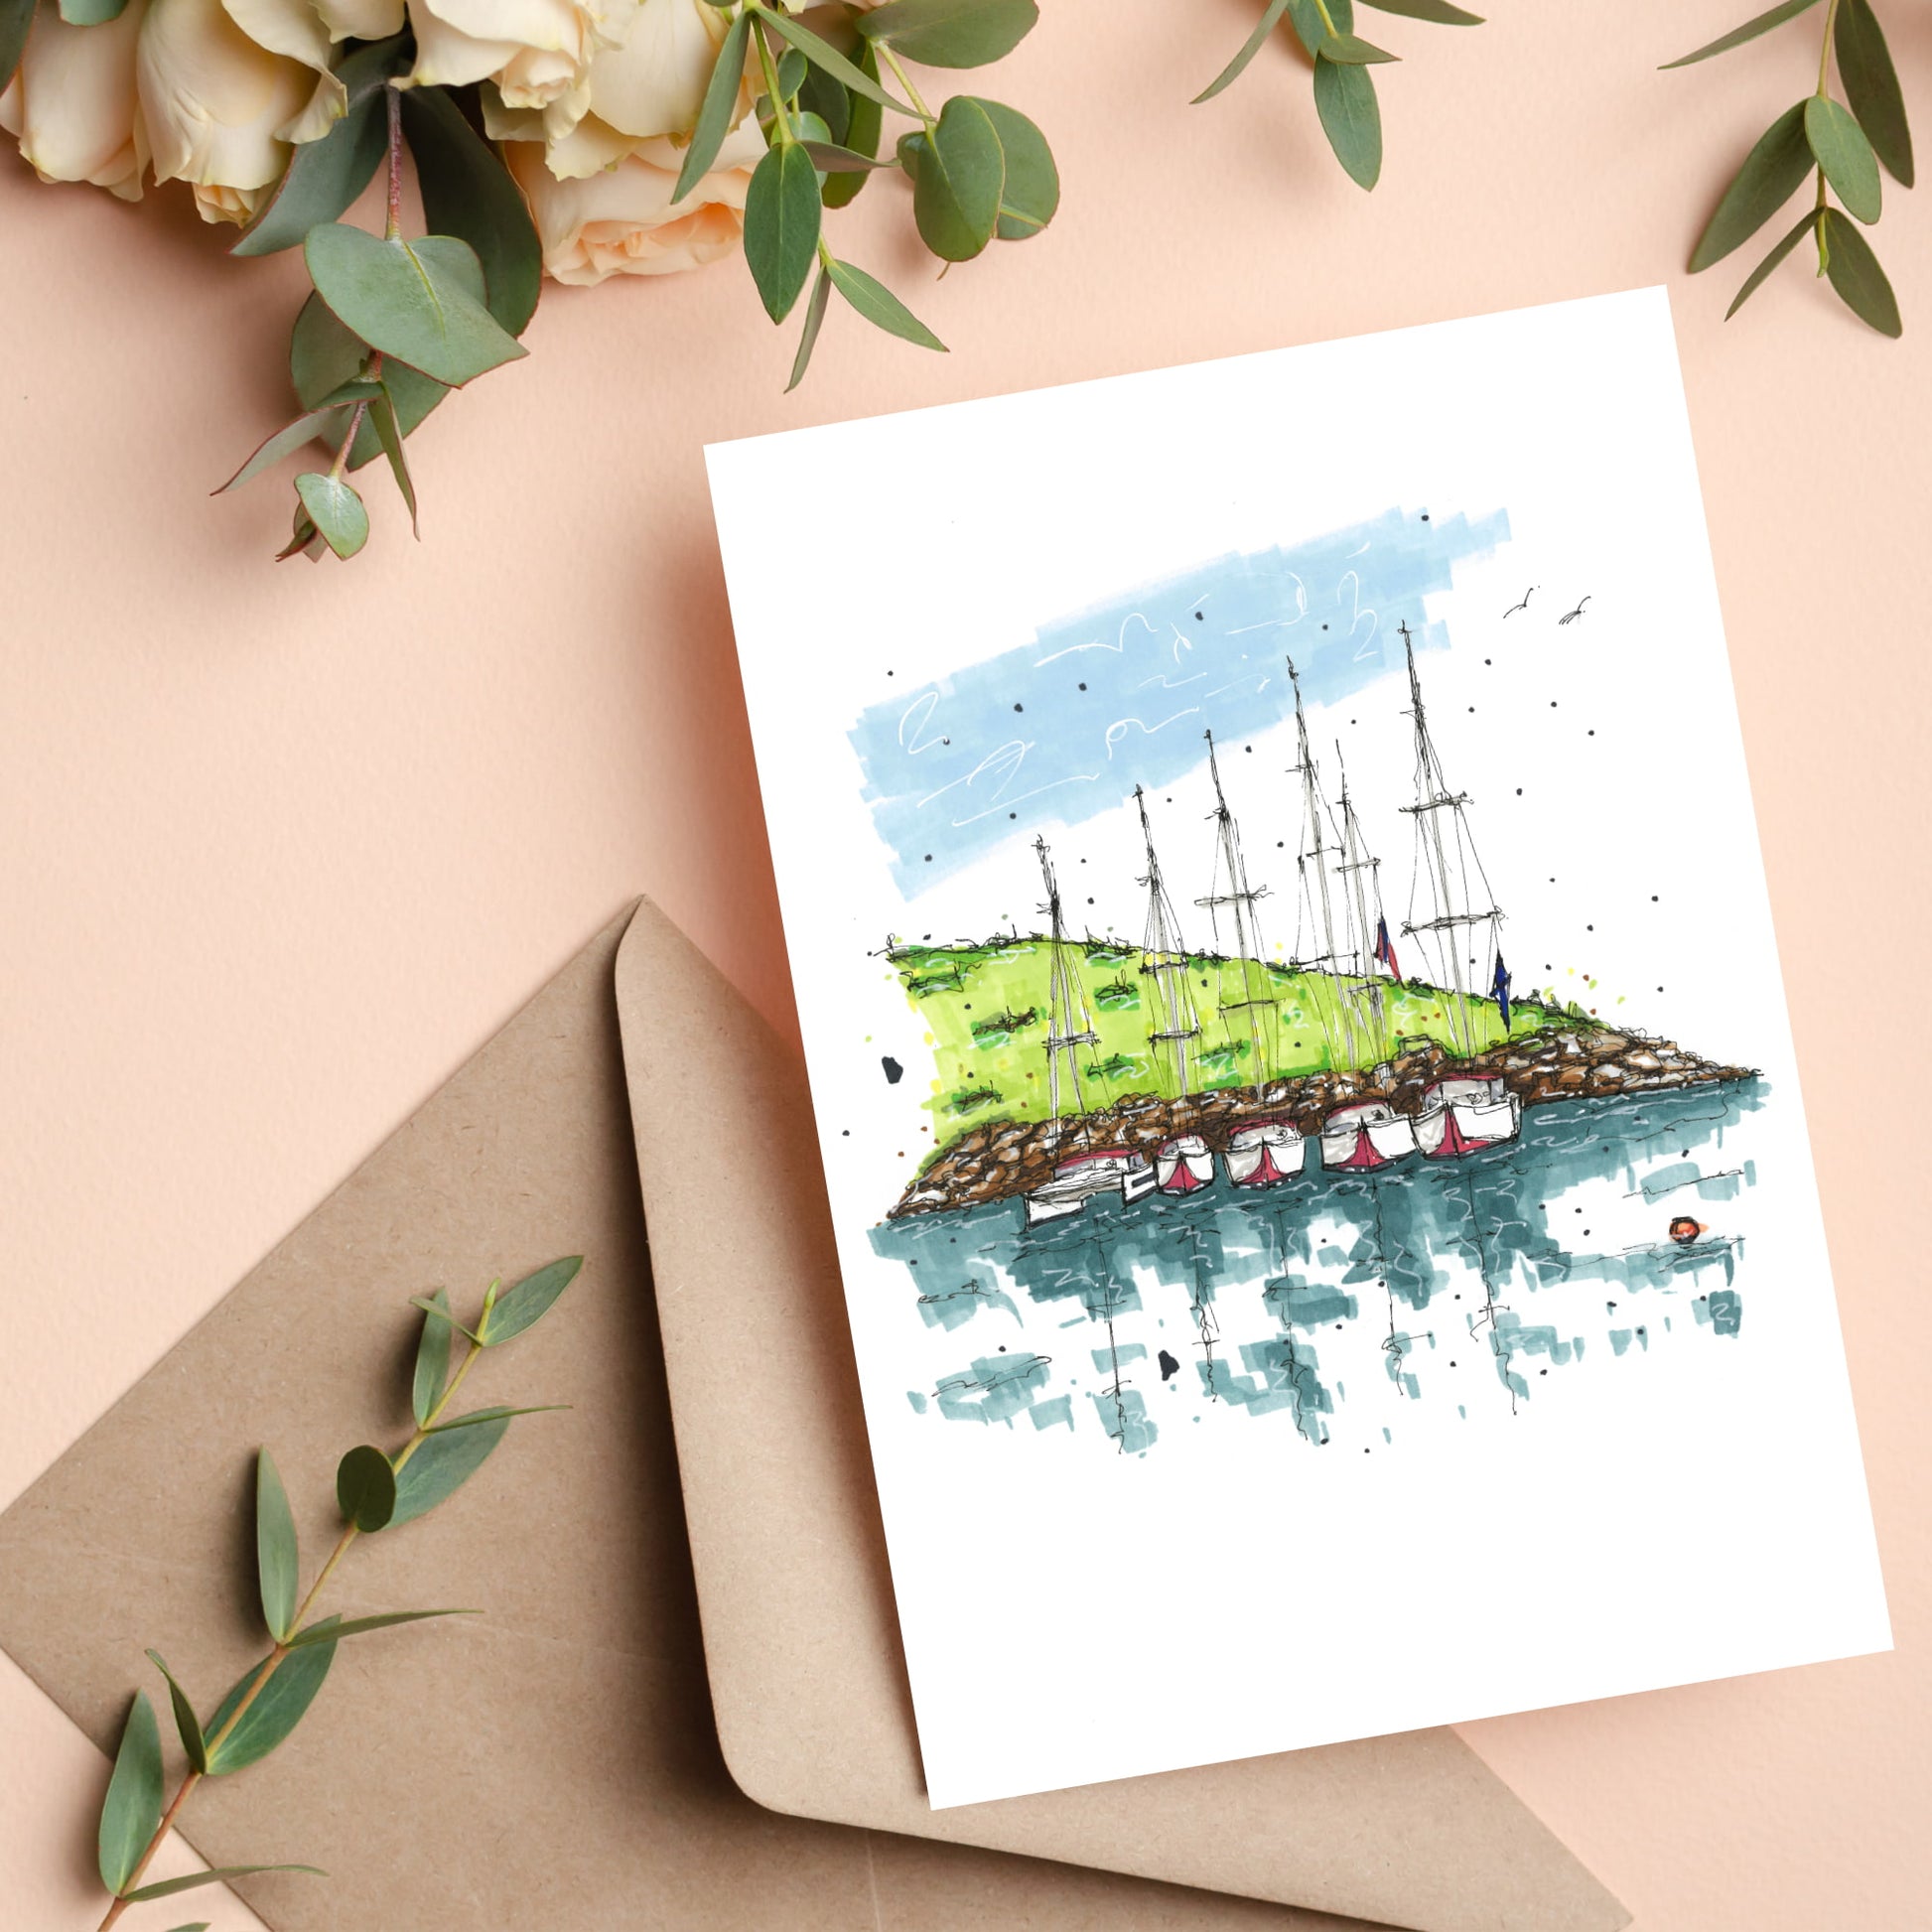 DTS0047 Anchored Sailboats, Greeting Card with Envelope, Downtown Sketcher, Wynand van Niekerk